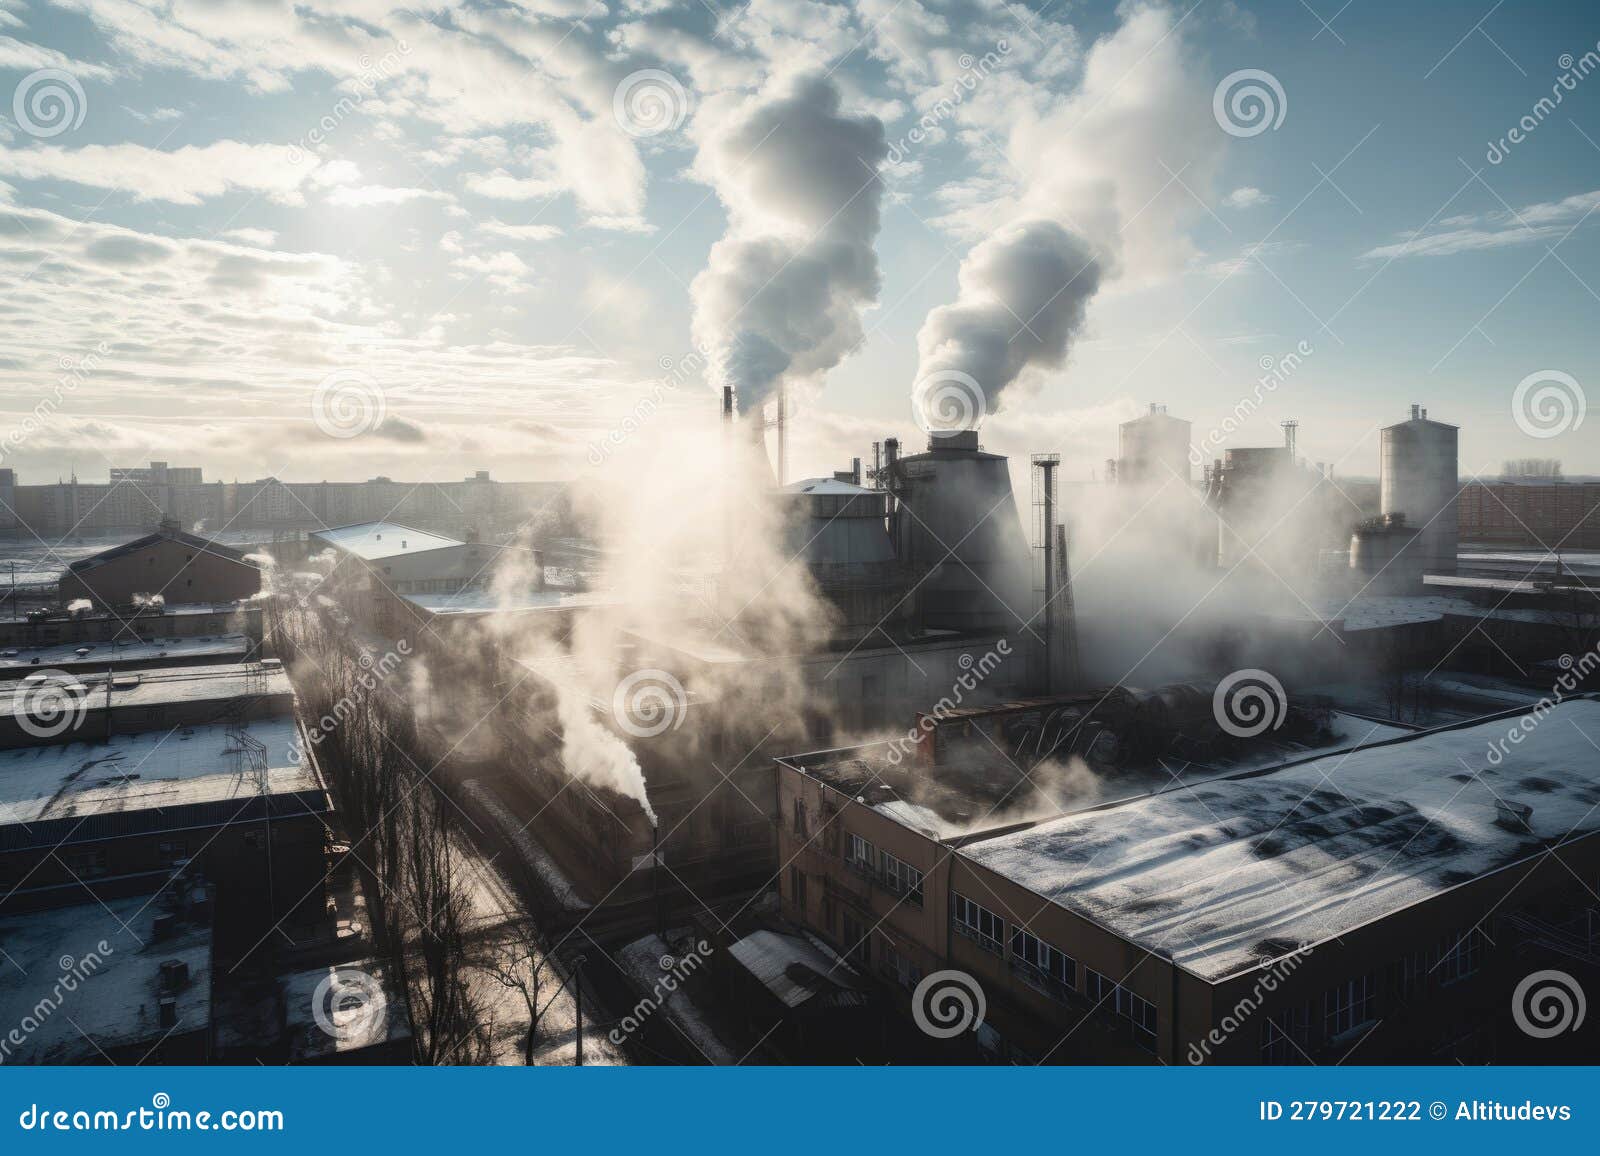 View of Factory, with Smoke and Fumes Billowing from Its Smokestacks ...